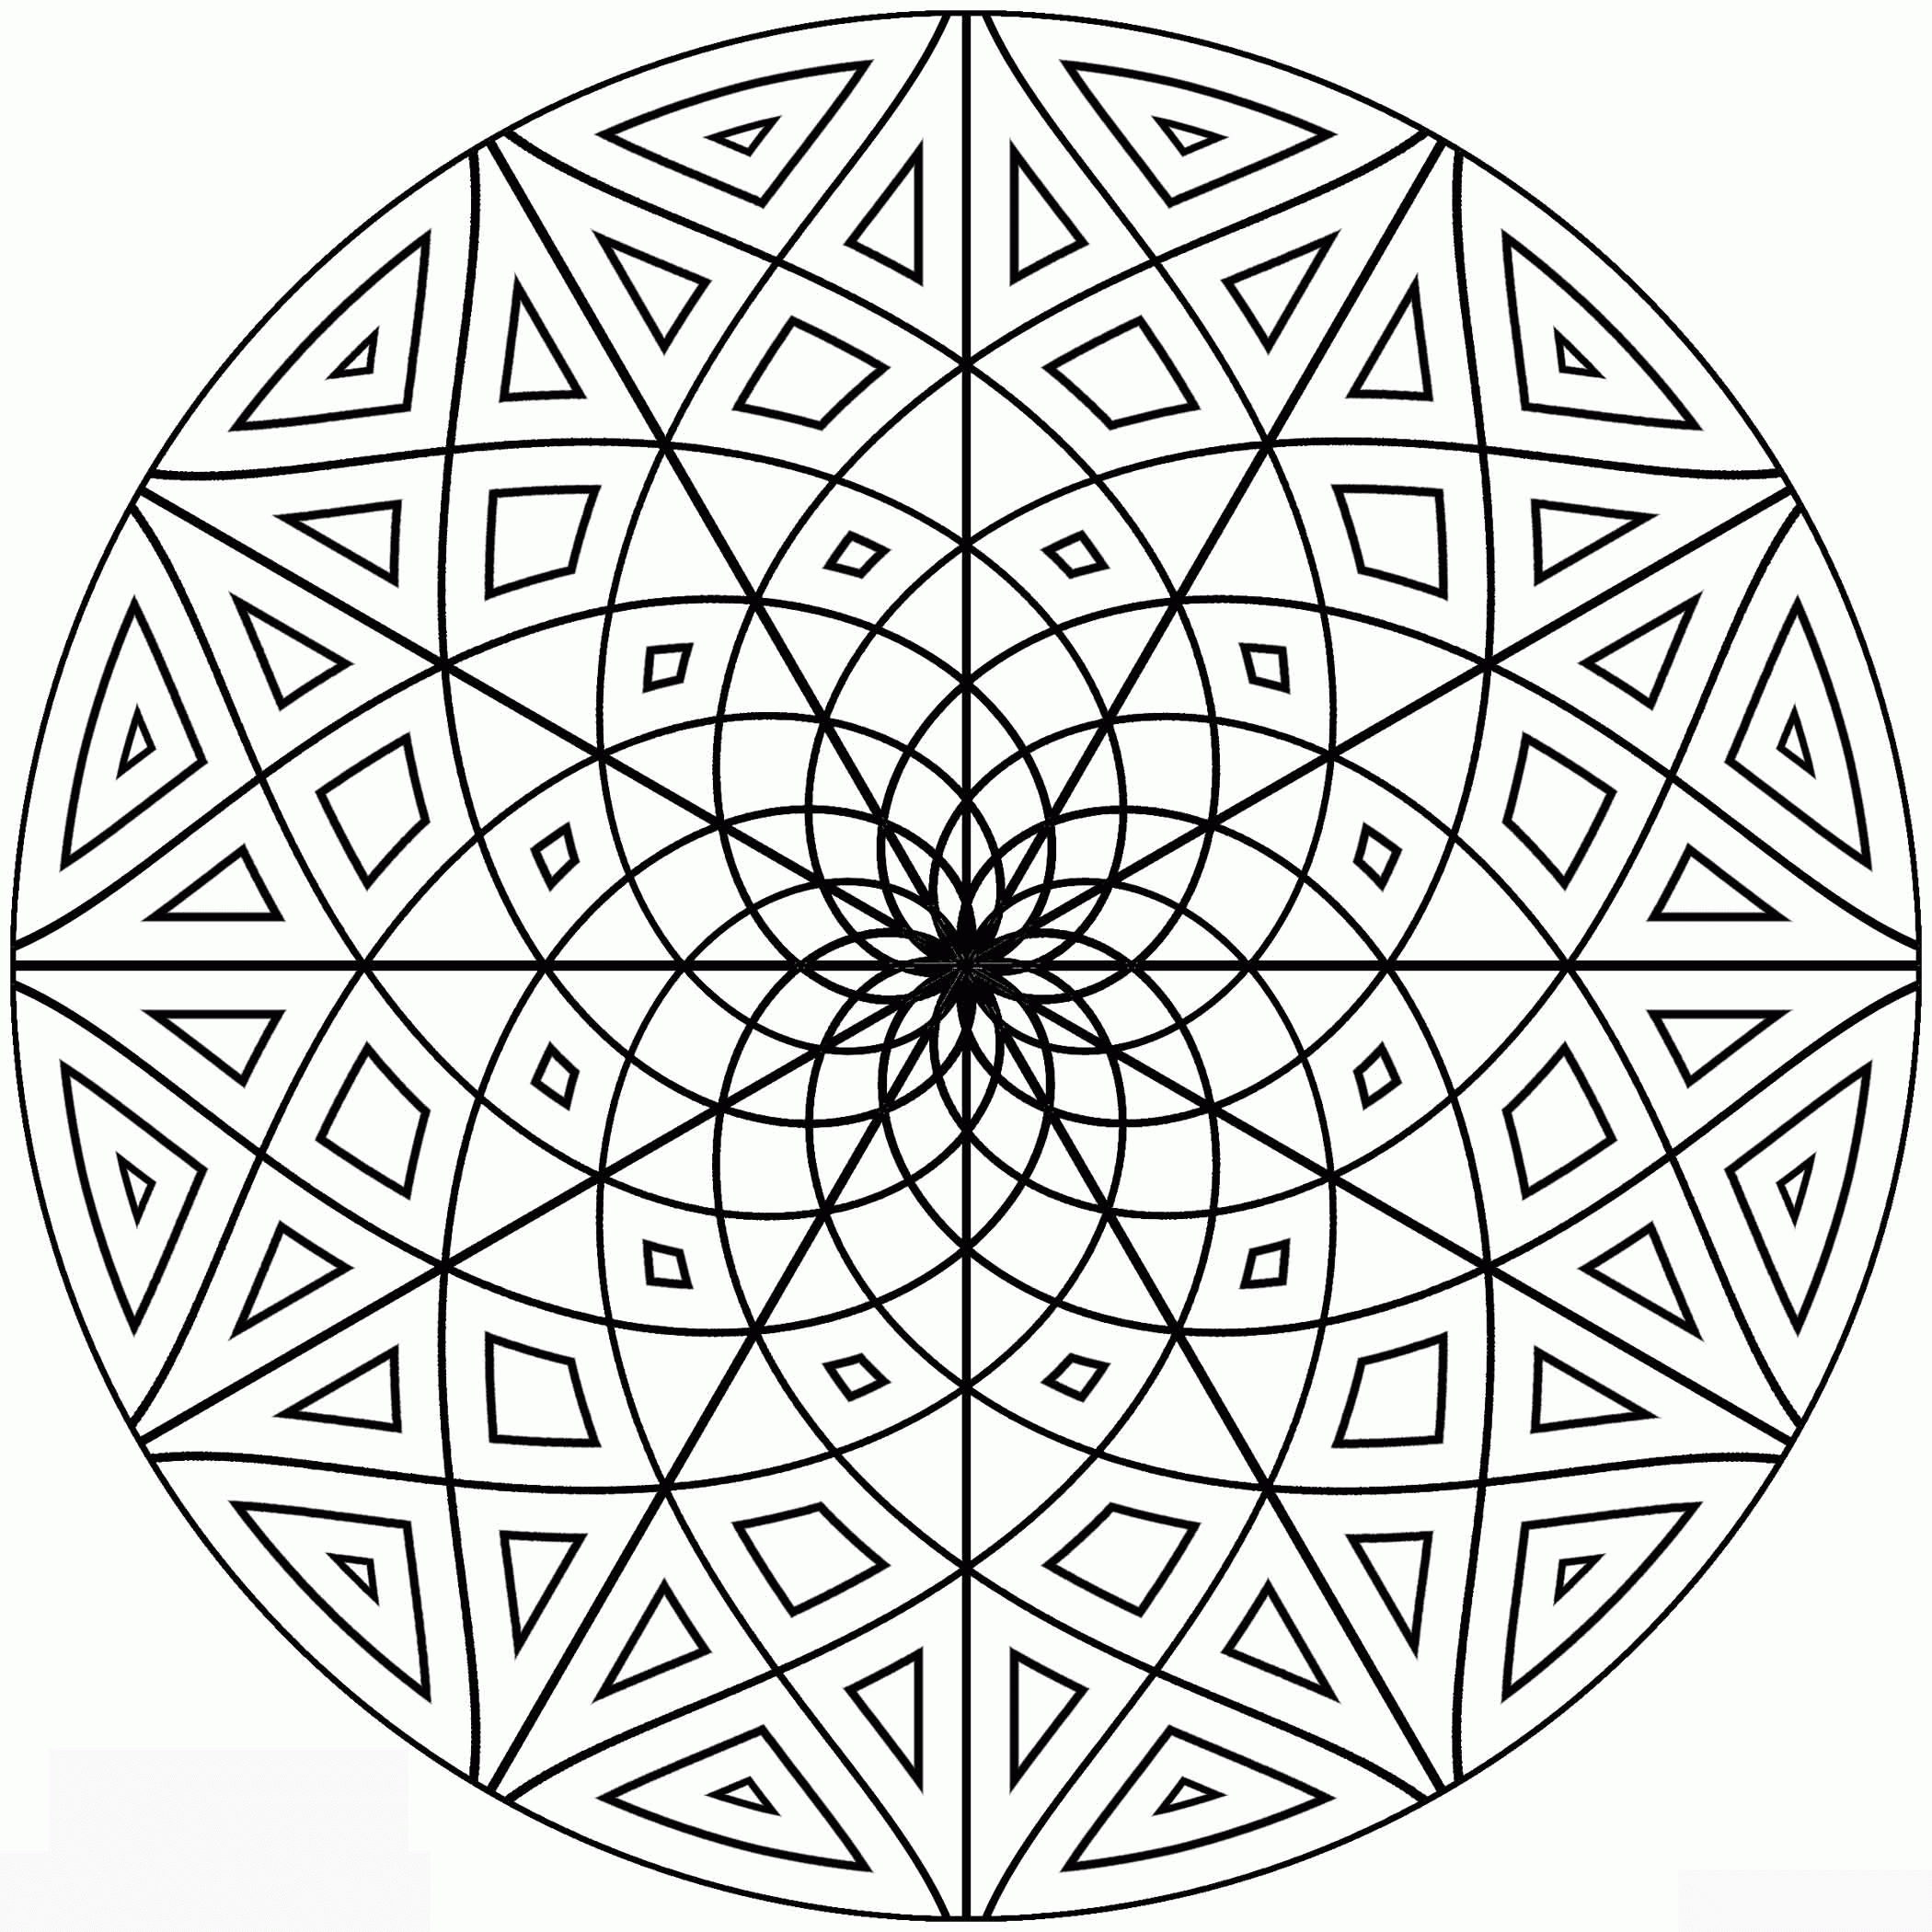 mosaic designs to color mosaic pattern coloring page mosaic pattern coloring page to color mosaic designs 